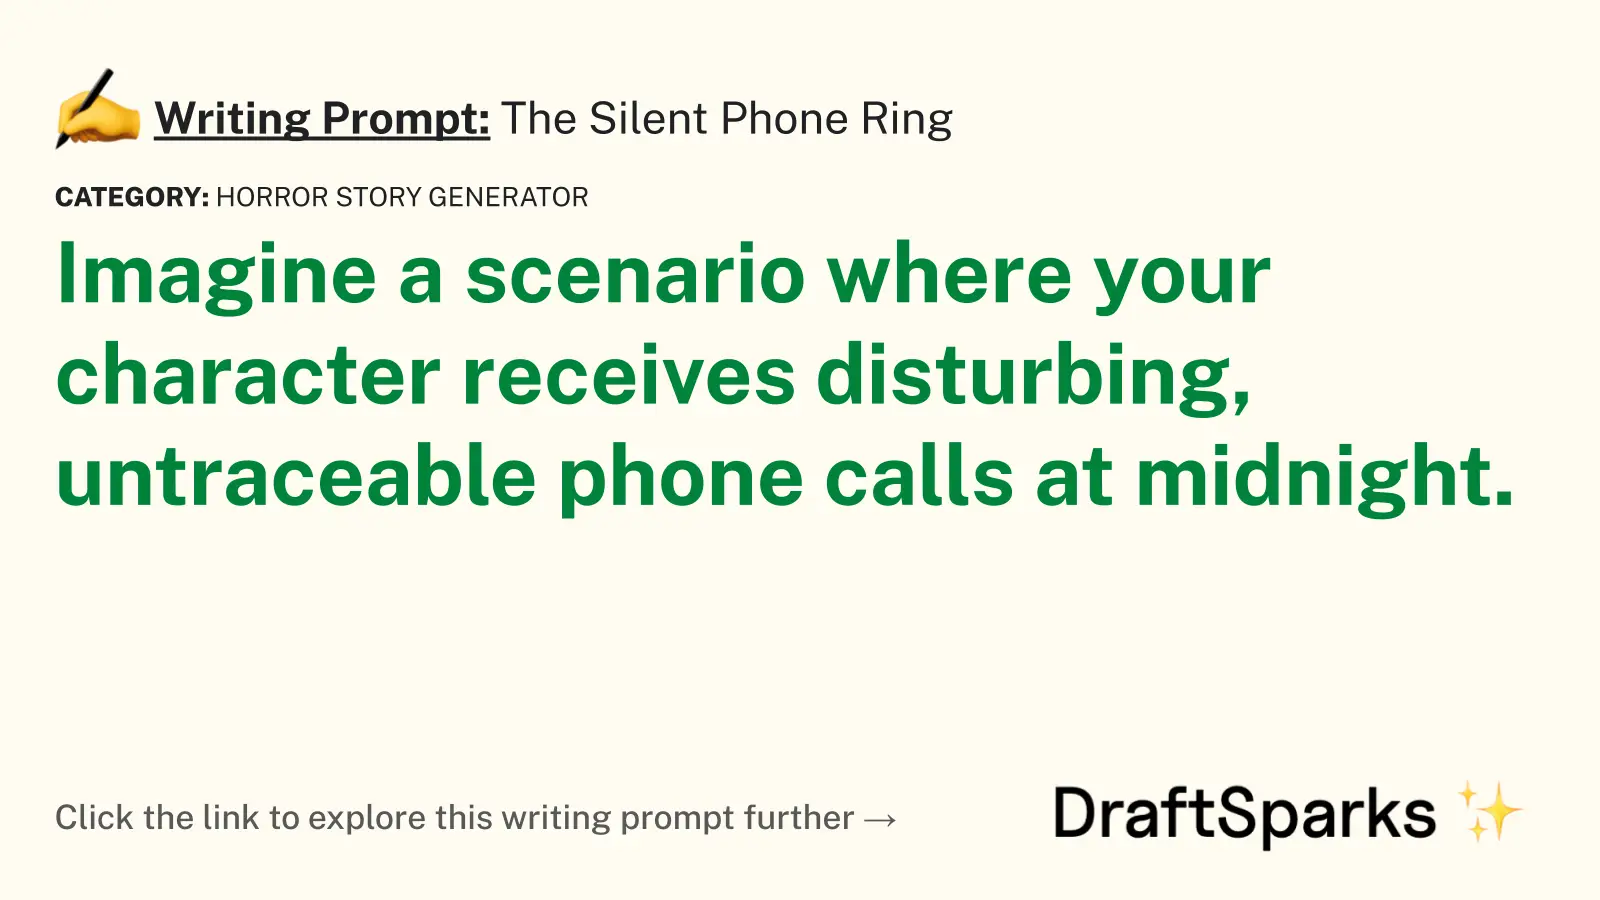 The Silent Phone Ring